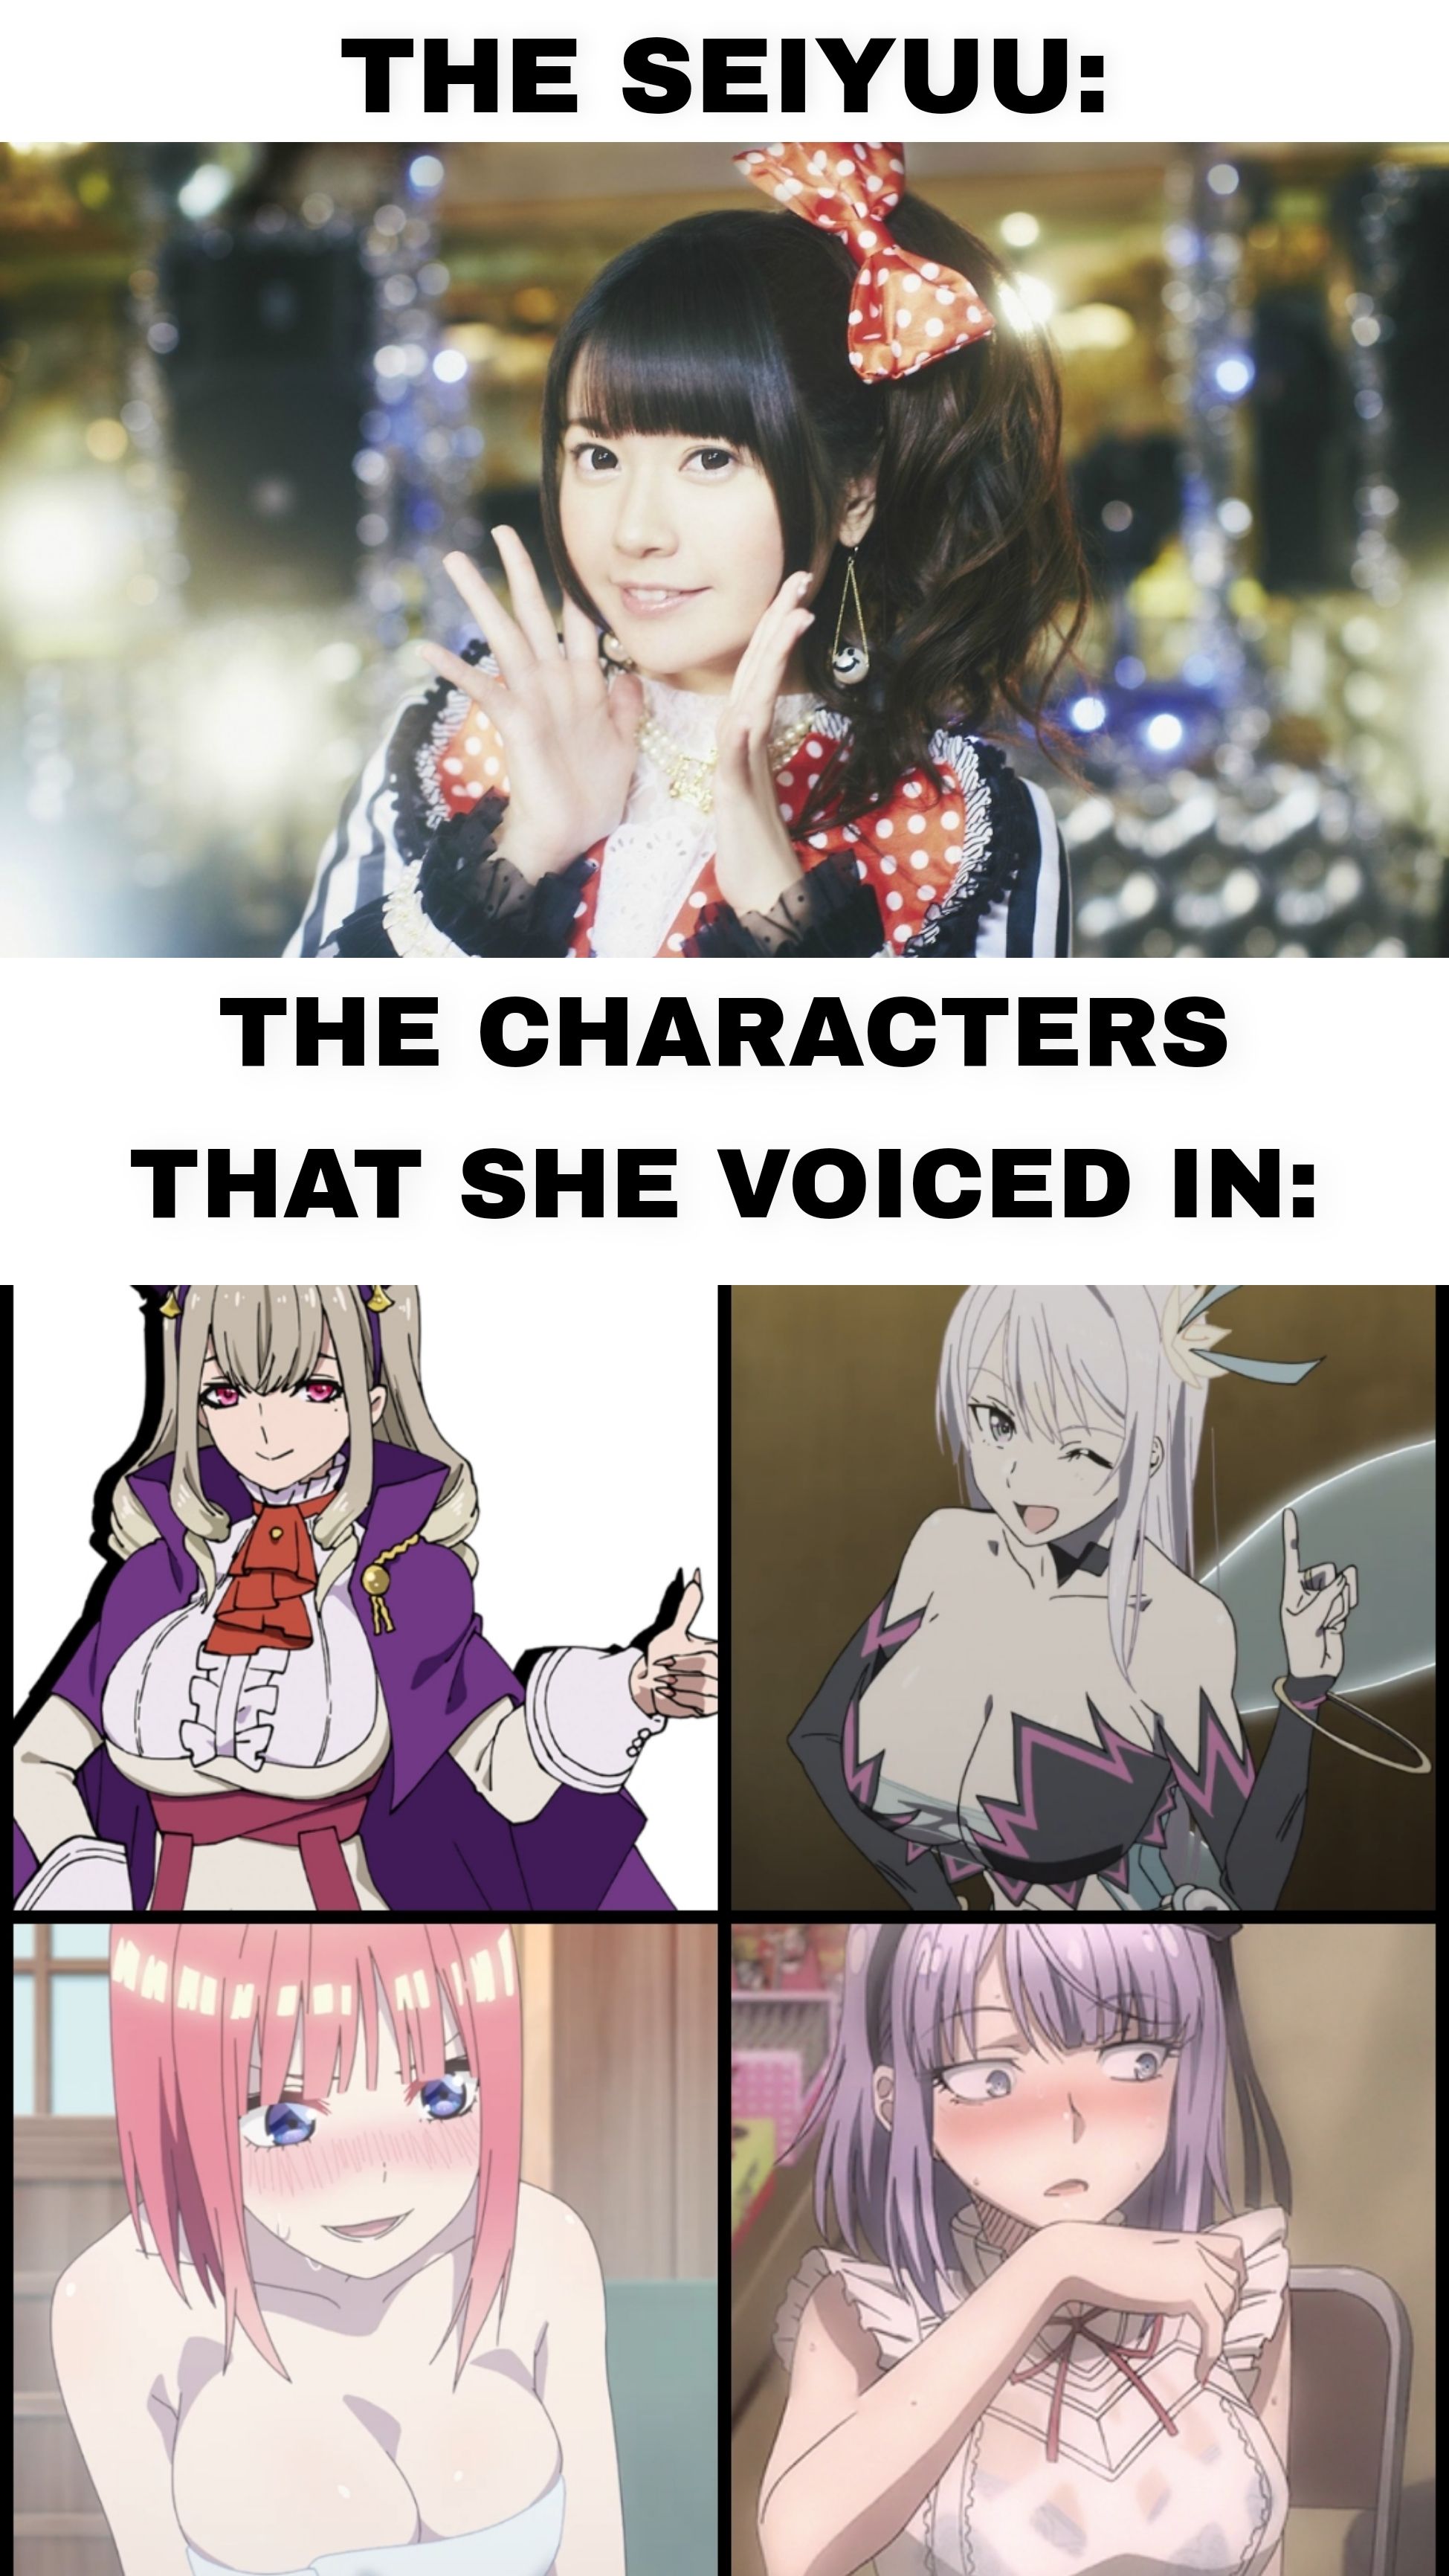 She loves voicing characters with Big Tiddies